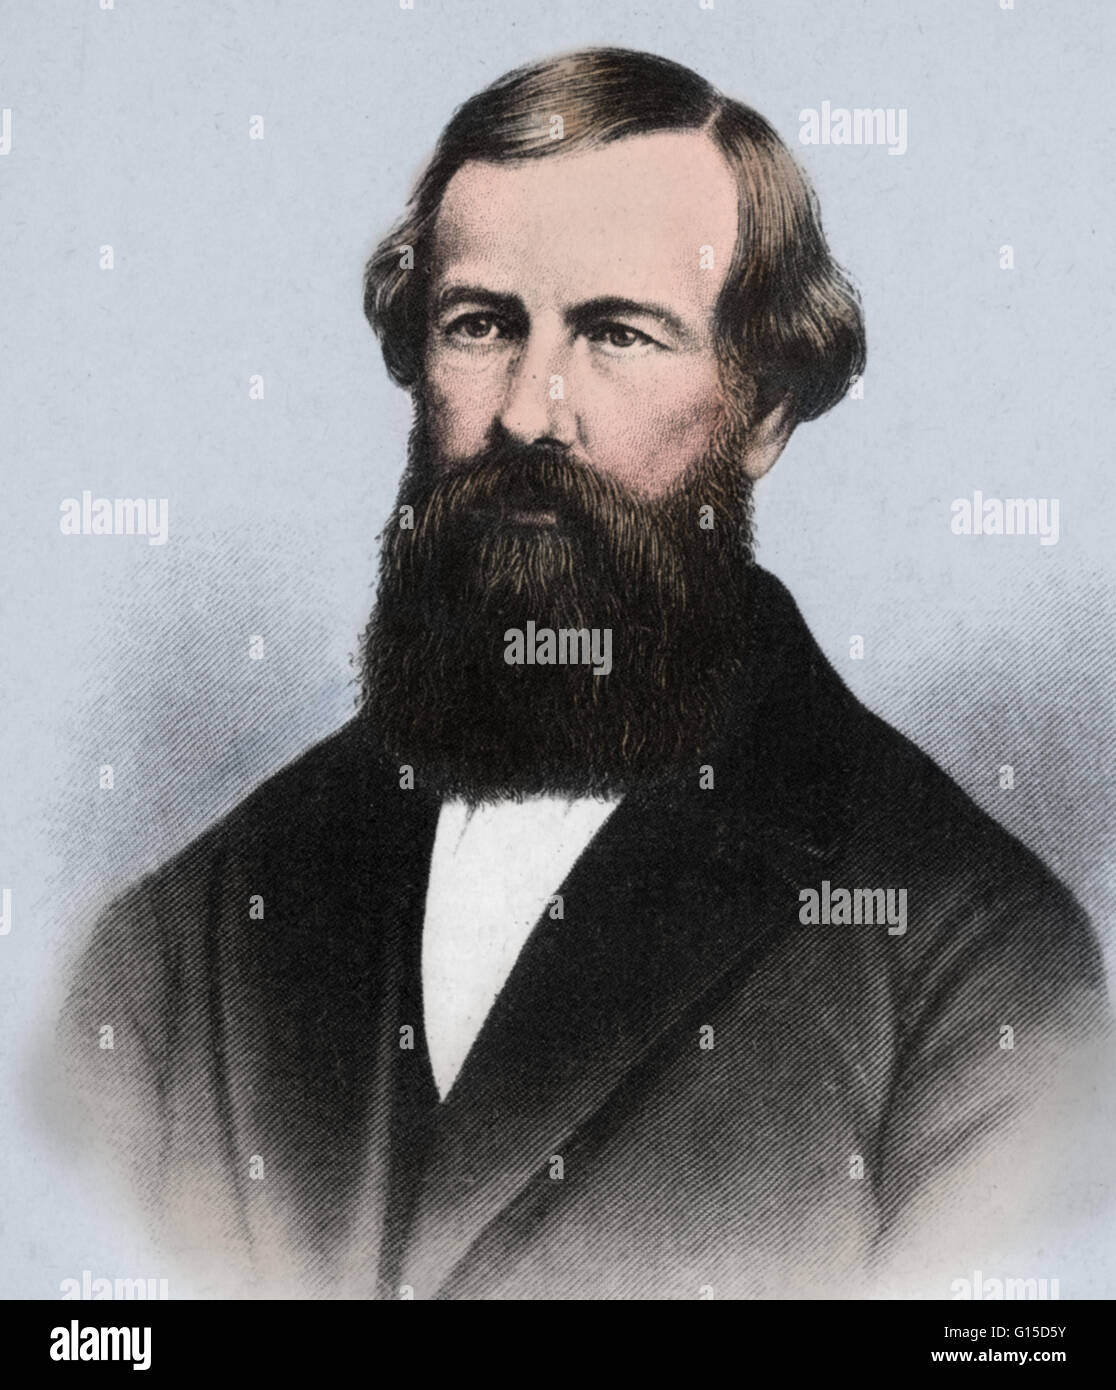 Elisha Graves Otis (August 3, 1811 - April 8, 1861) was an American industrialist, founder of the Otis Elevator Company, and inventor of a safety device that prevents elevators from falling if the hoisting cable fails. At the age of 40, while he was clean Stock Photo